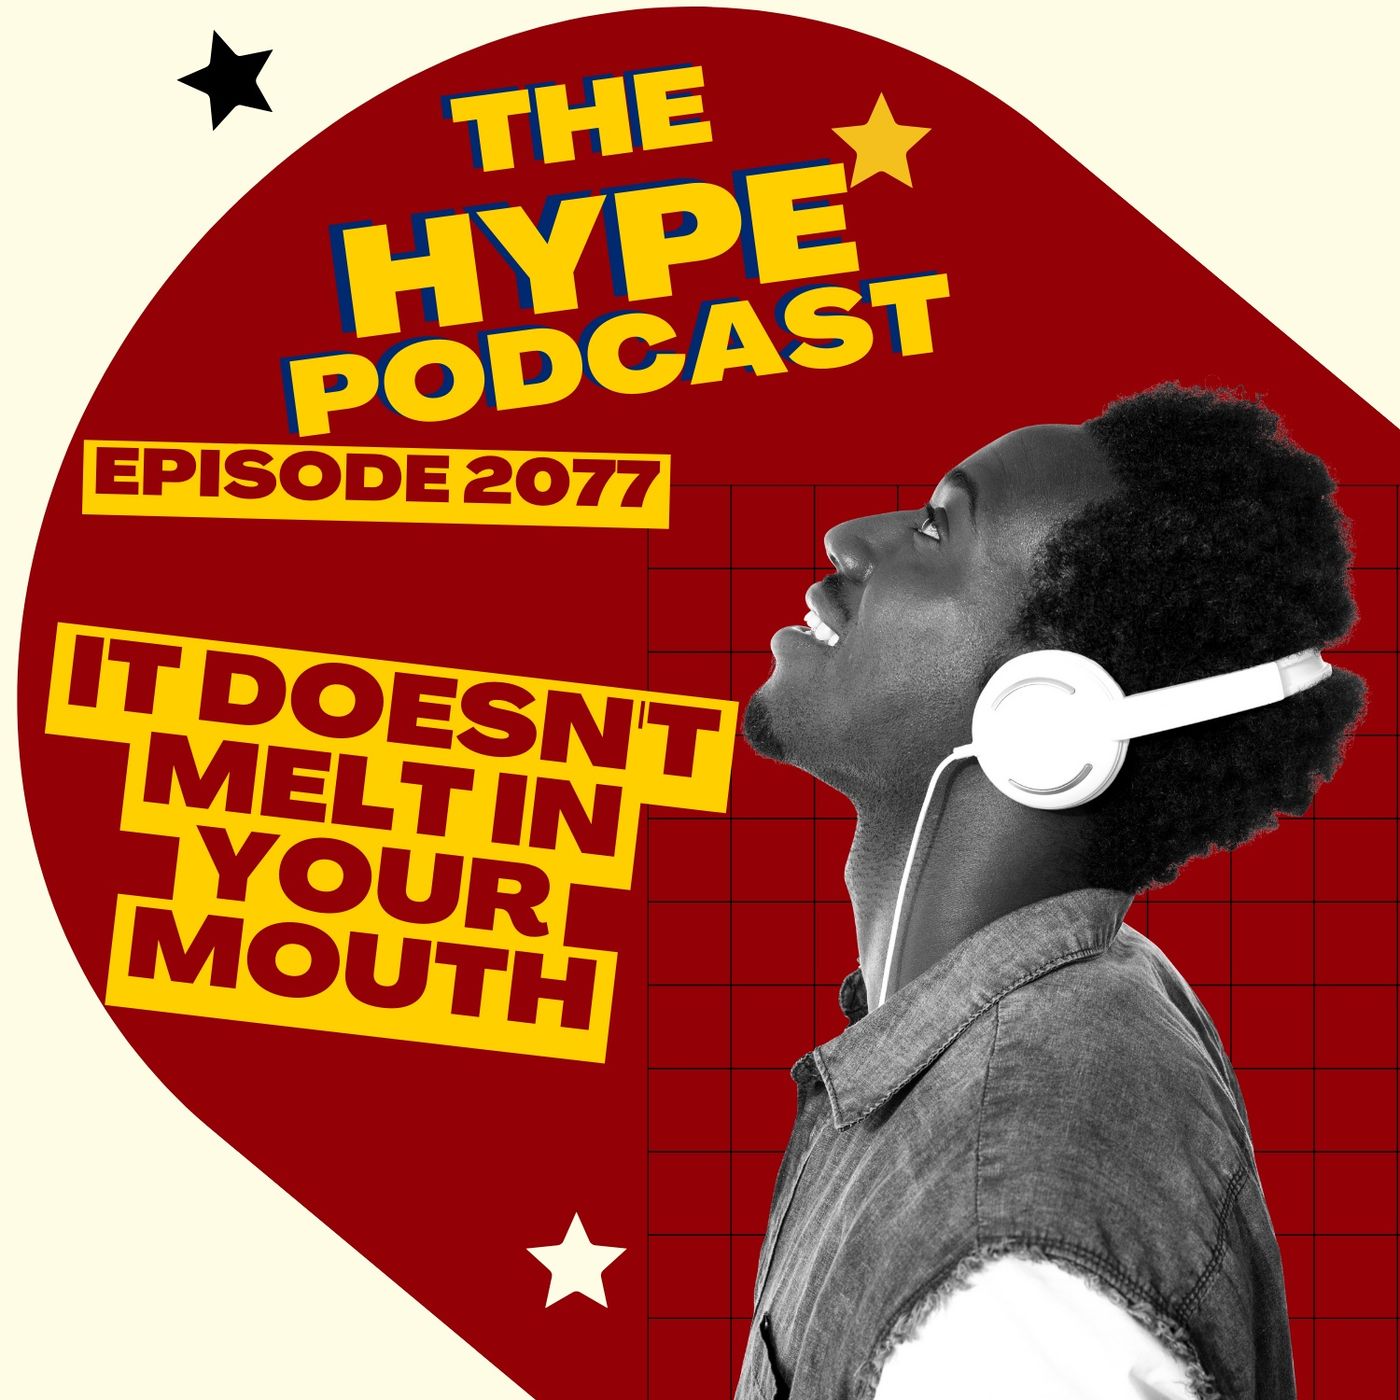 Episode 2077 It doesn't melt in your mouth